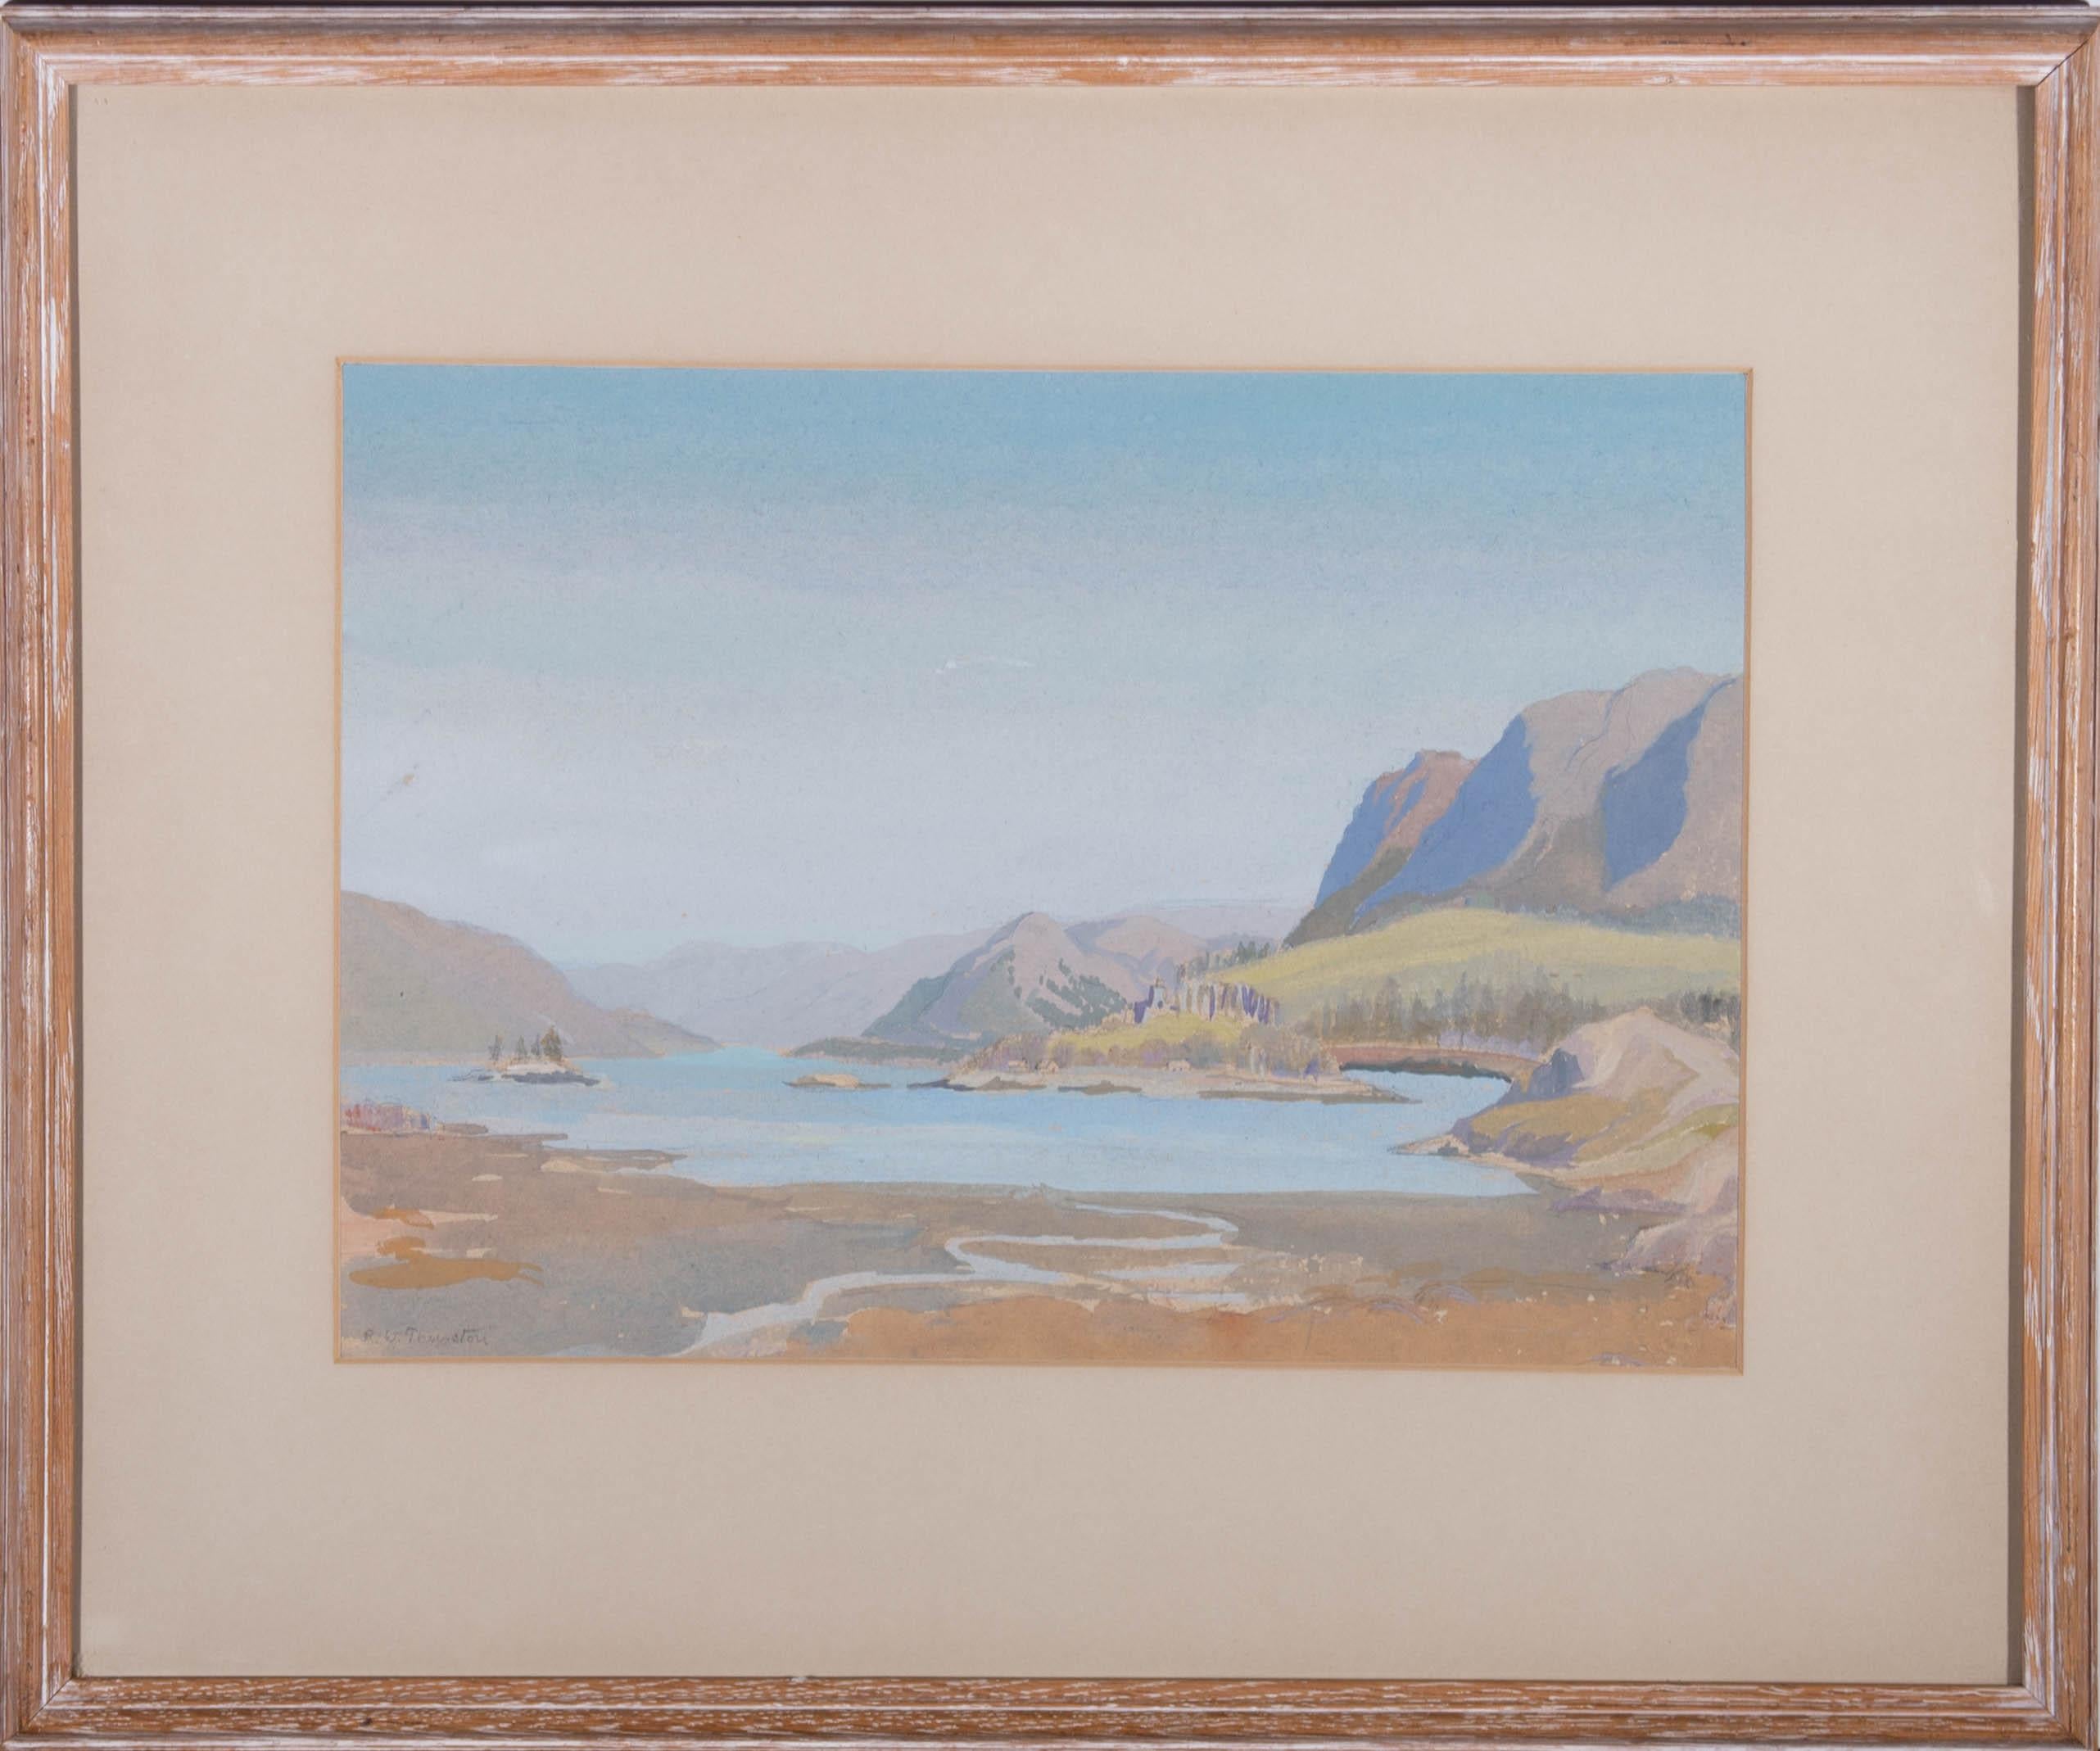 A charming watercolour and graphite scene of Loch Marie in Scotland amongst the mountains, well presented in a card mount and wooden frame. The artist has signed to the lower left corner. On wove.


















